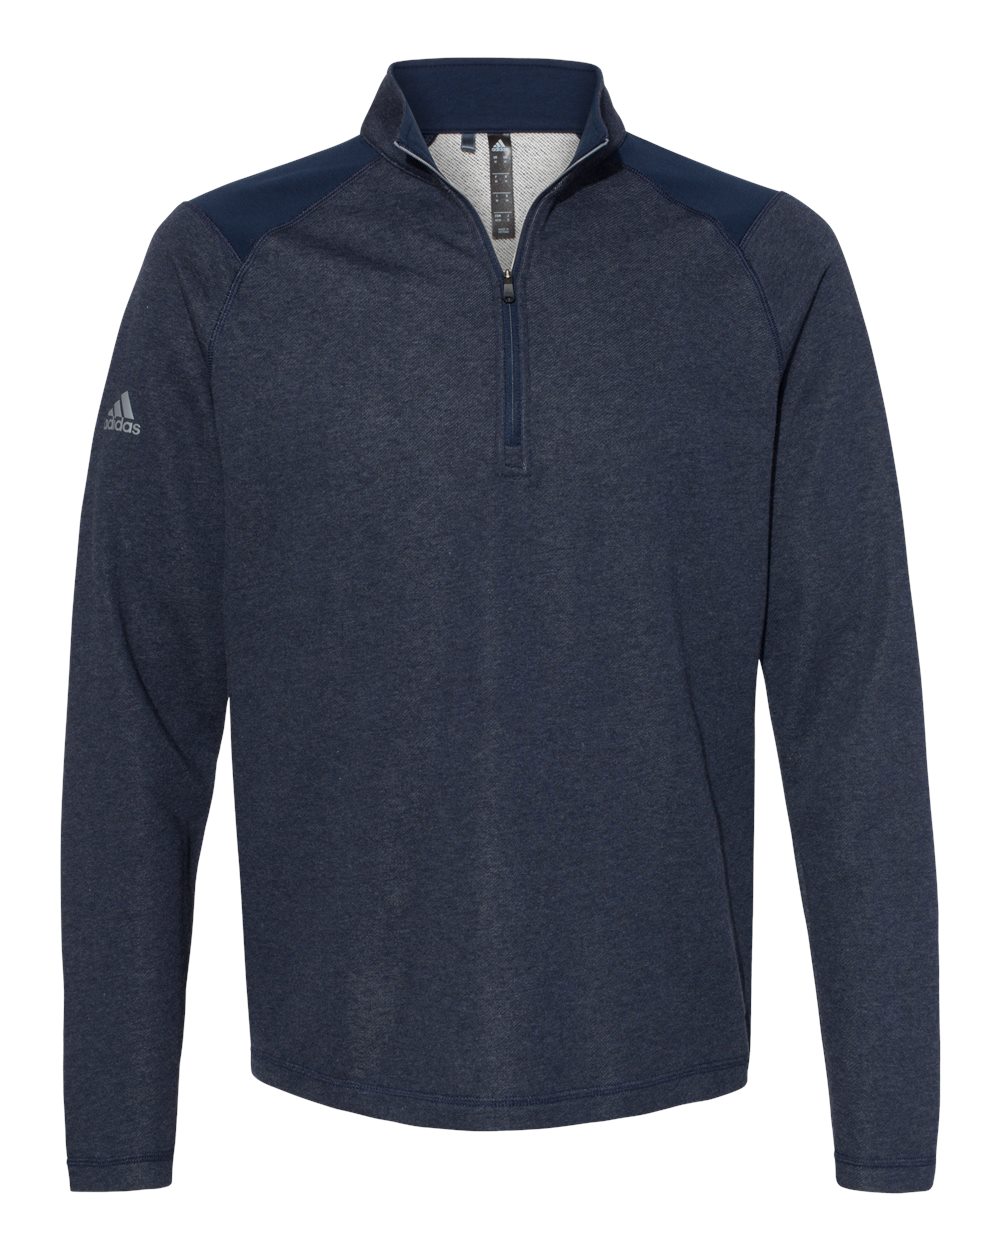 click to view Collegiate Navy Heather